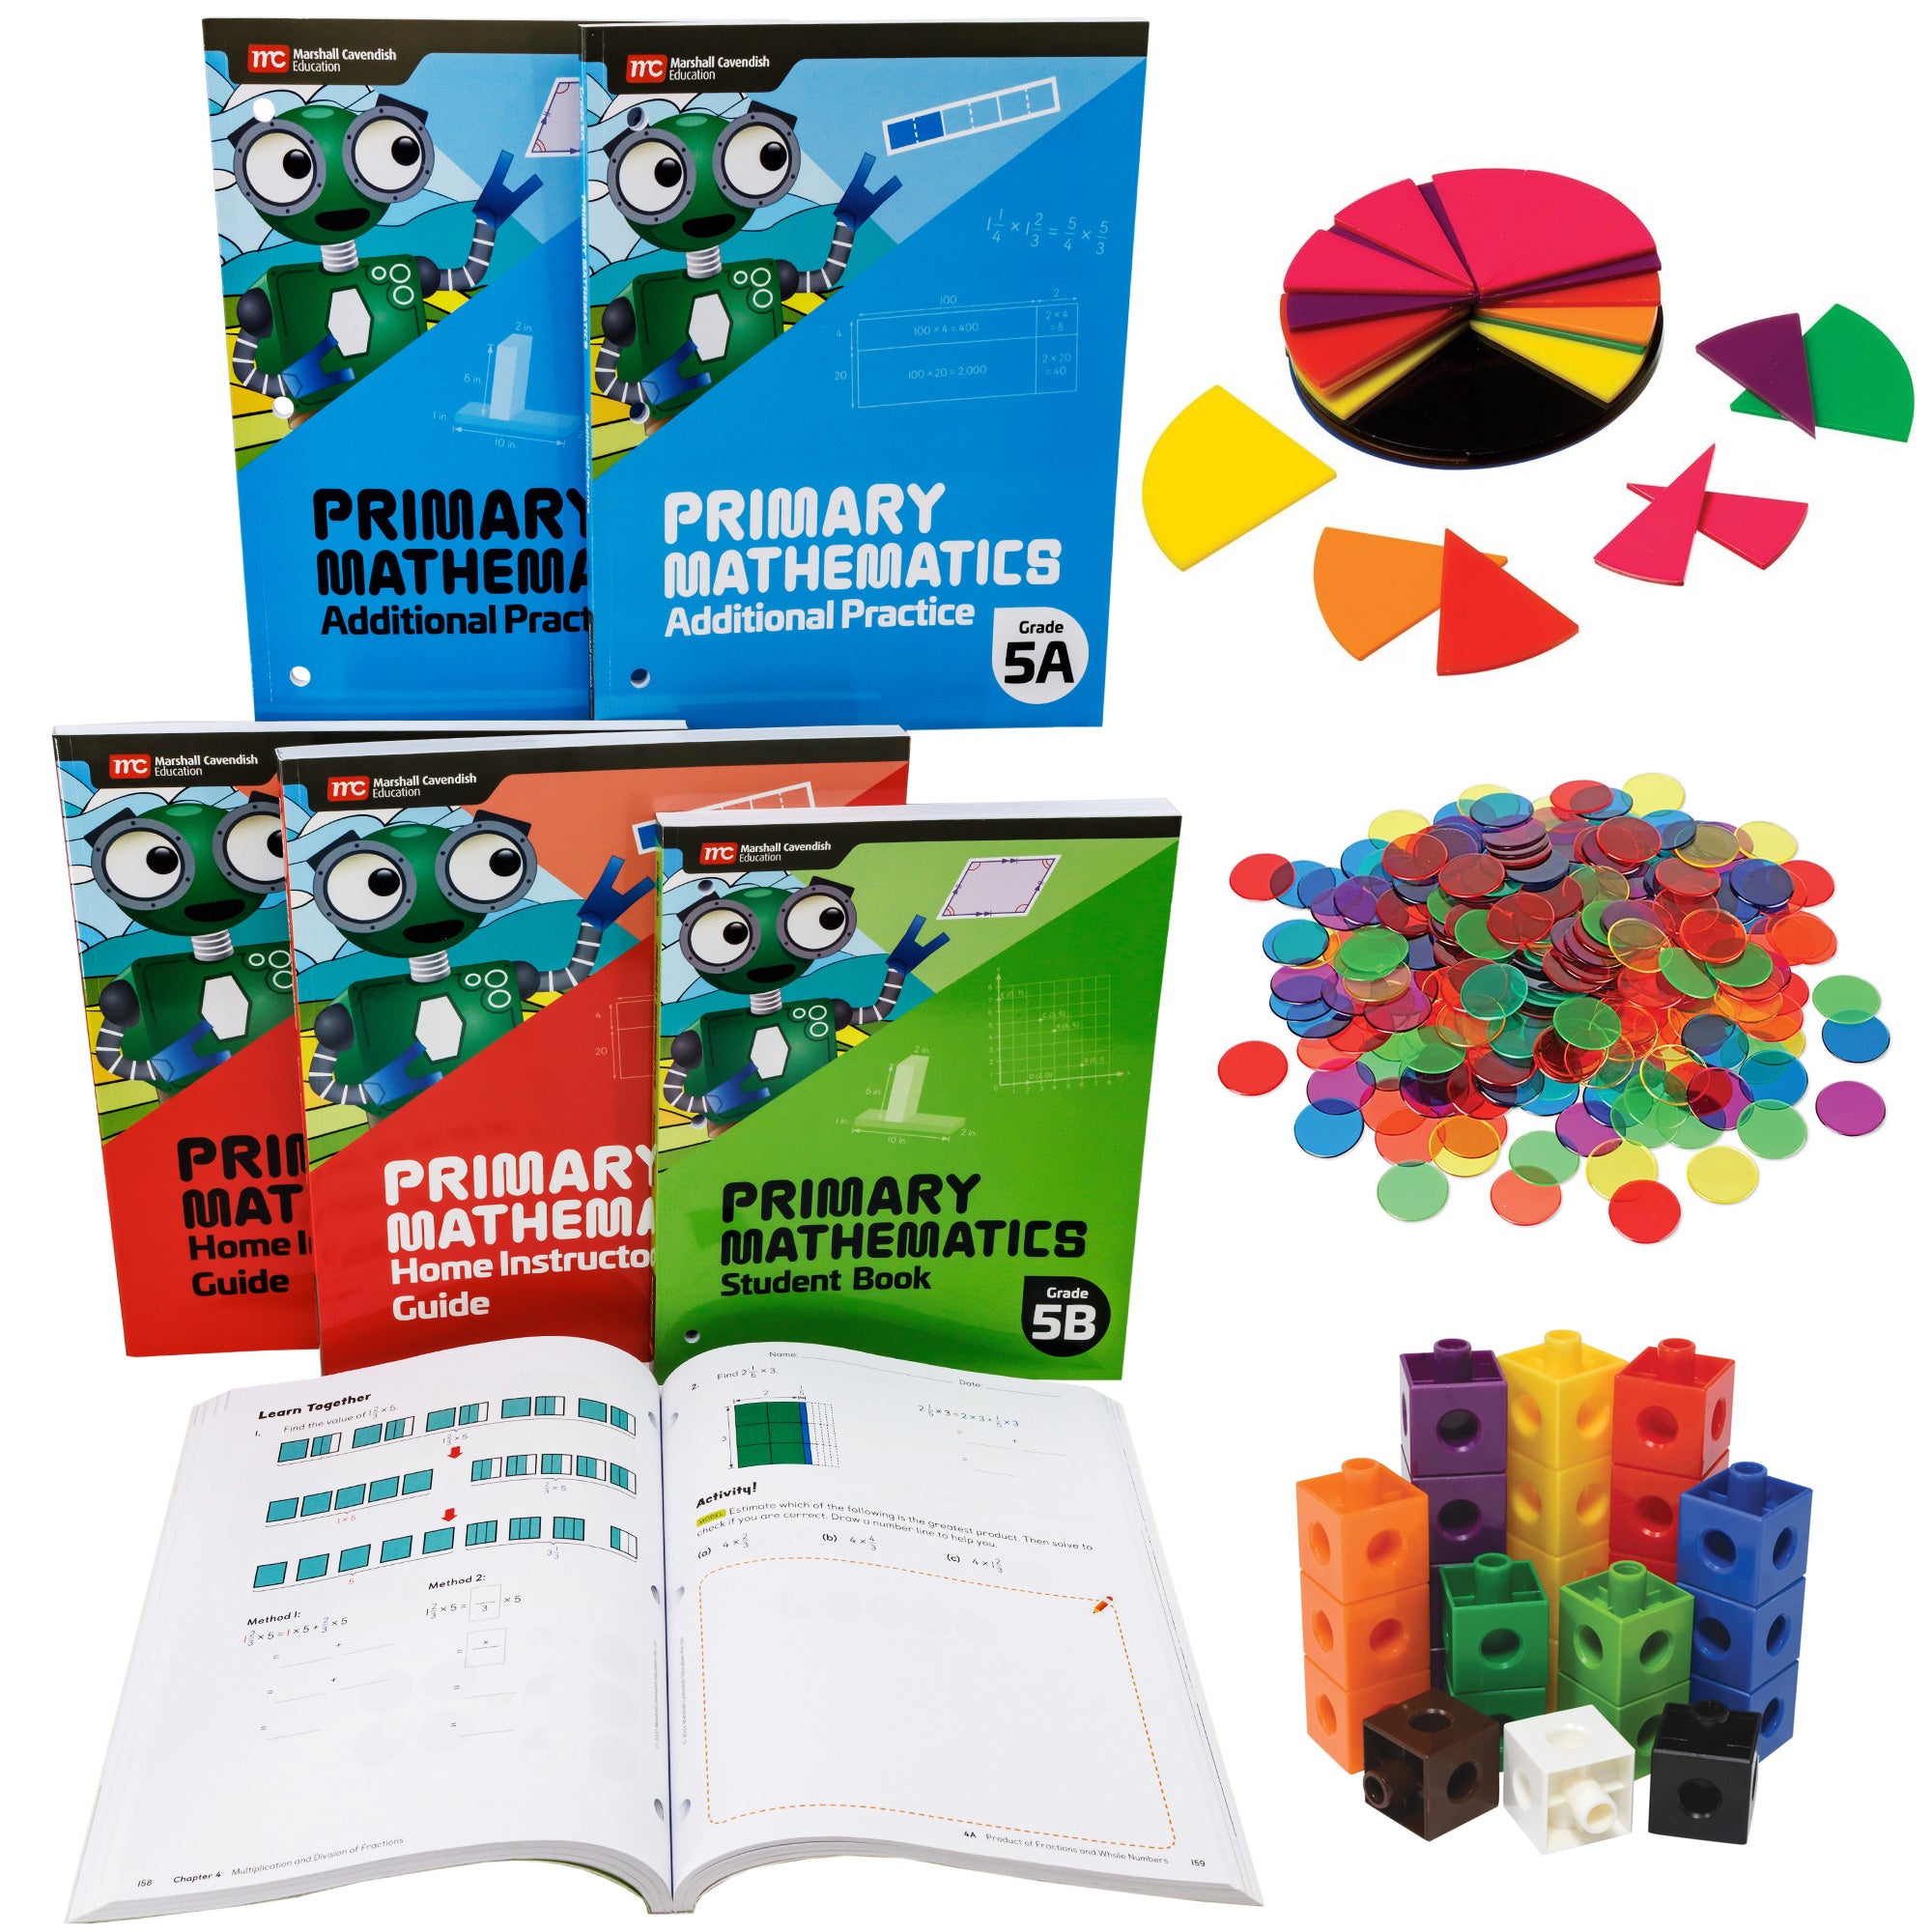 Singapore Primary Mathematics fifth grade Set. On the left are 6 books with a robot on each cover. Top row shows 2 blue books. Middle row shows 3 books; 2 red and 1 green. On the bottom is one open book showing math problems. On the right are manipulatives in a variety of colors. Top shows fraction pieces. Middle shows transparent round tokens. Bottom shows connected blocks.